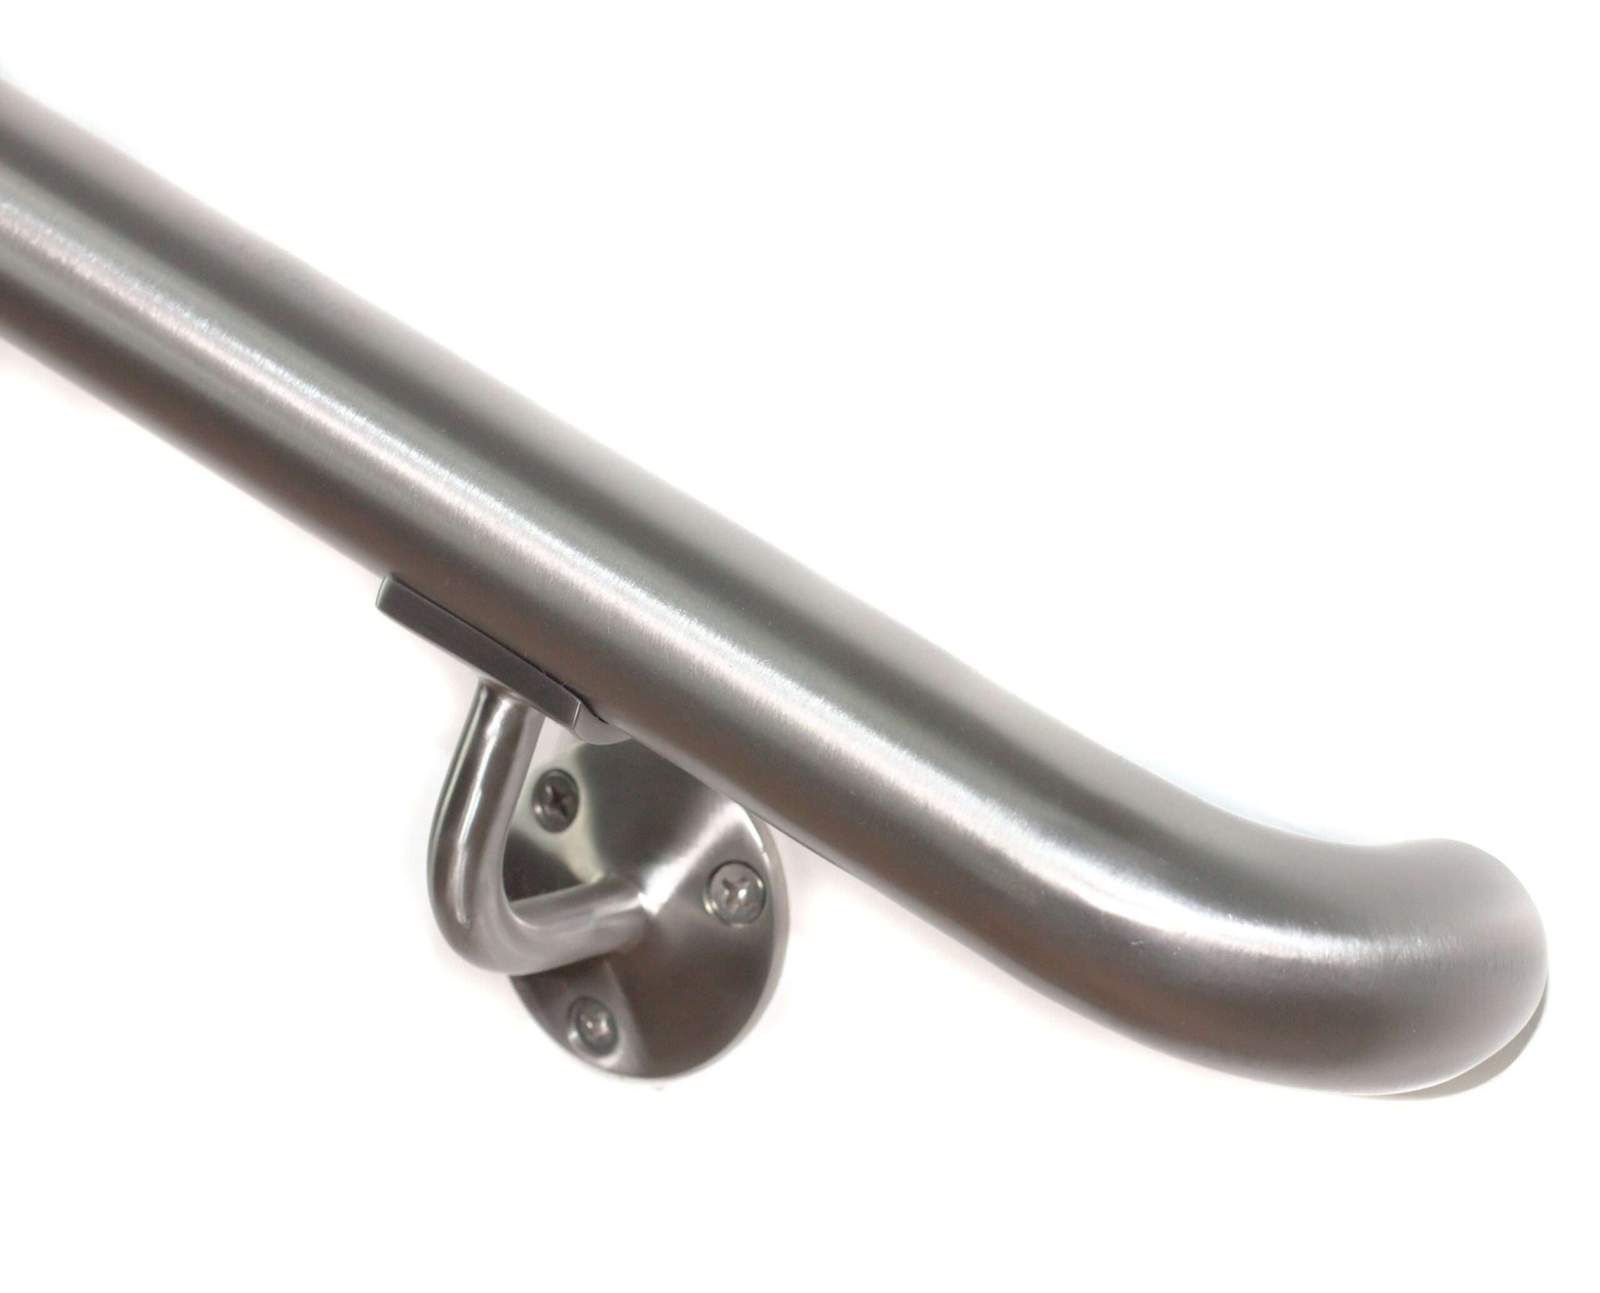 Stainless steel round ADA Handrail brushed nickel – Concrete / concrete / 66 in